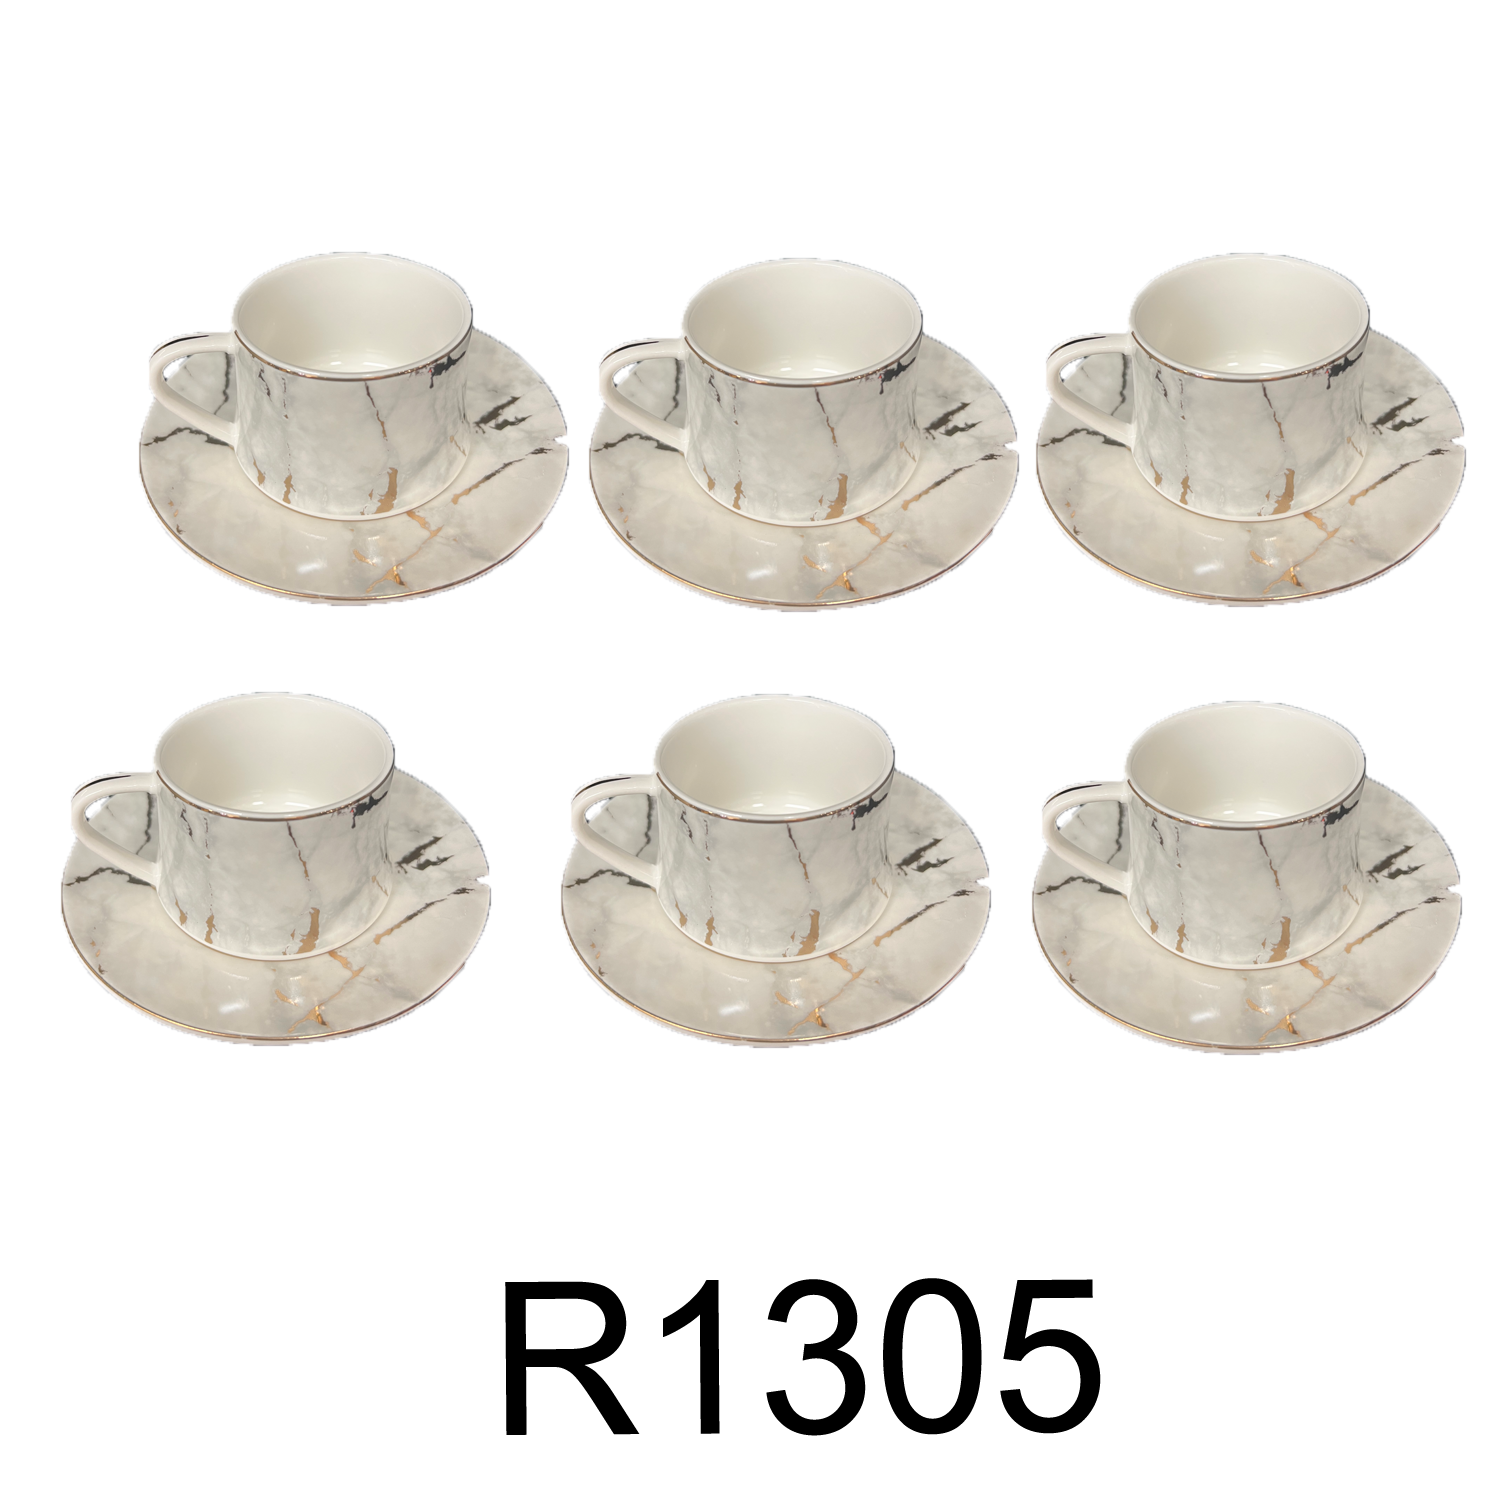 Marble Tea Set with Cups and Tea Tray | White and Gold